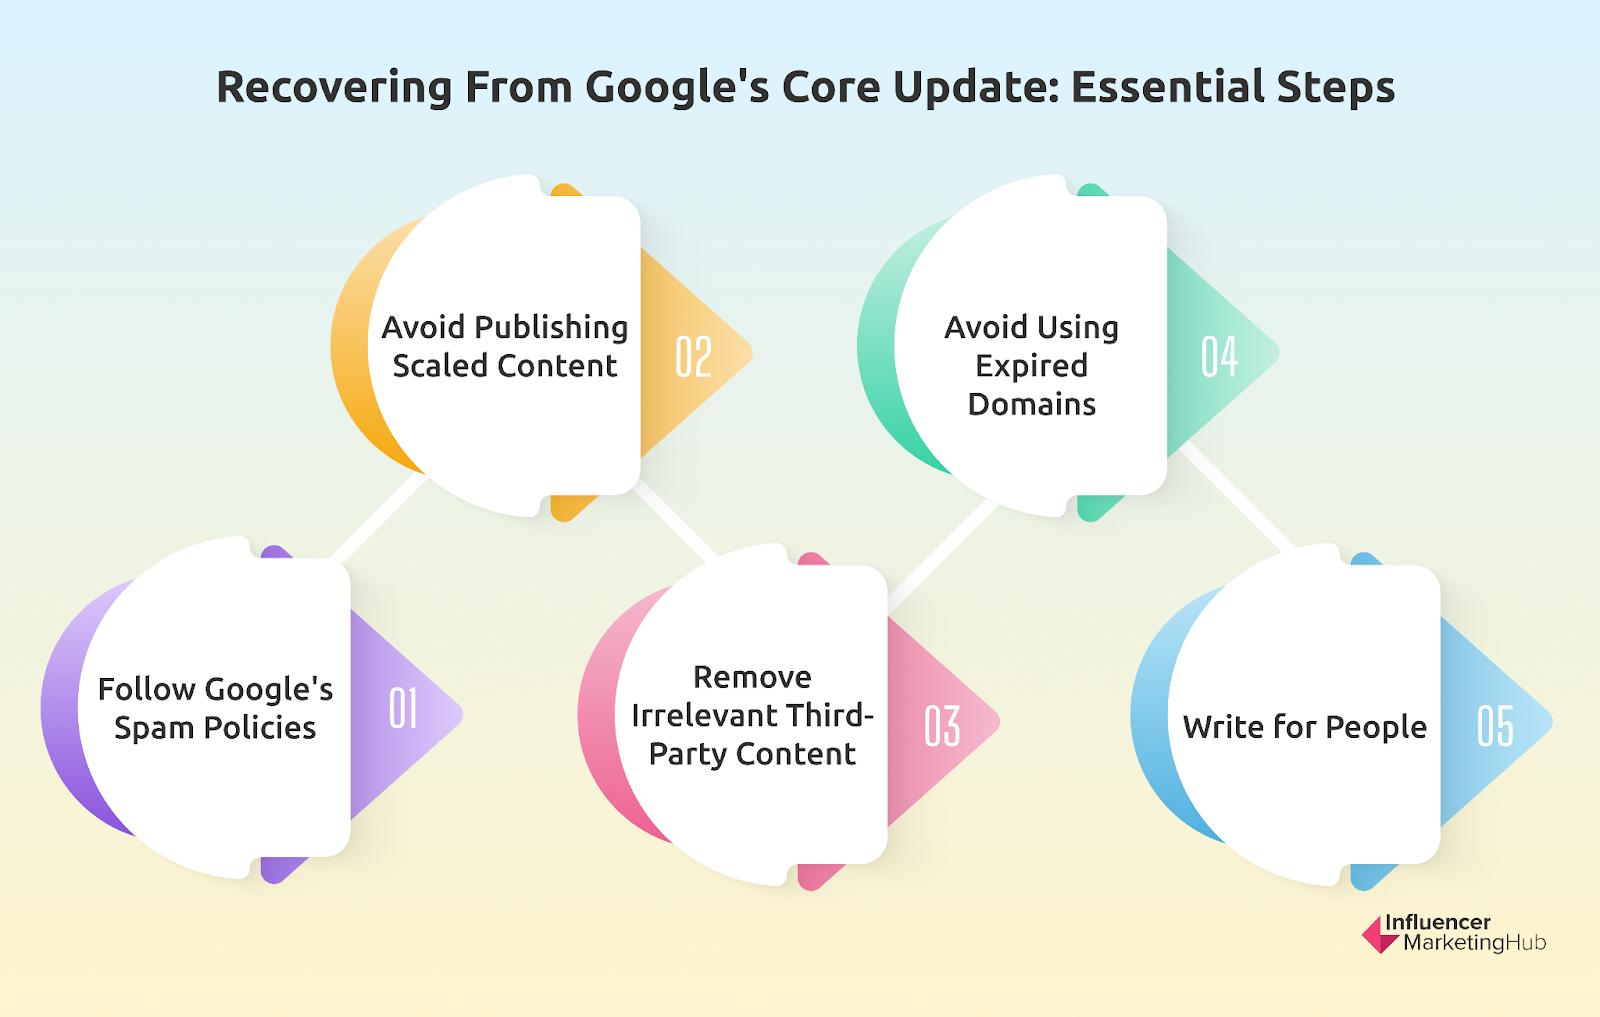 Recovering From Google's Core Update: Essential Steps